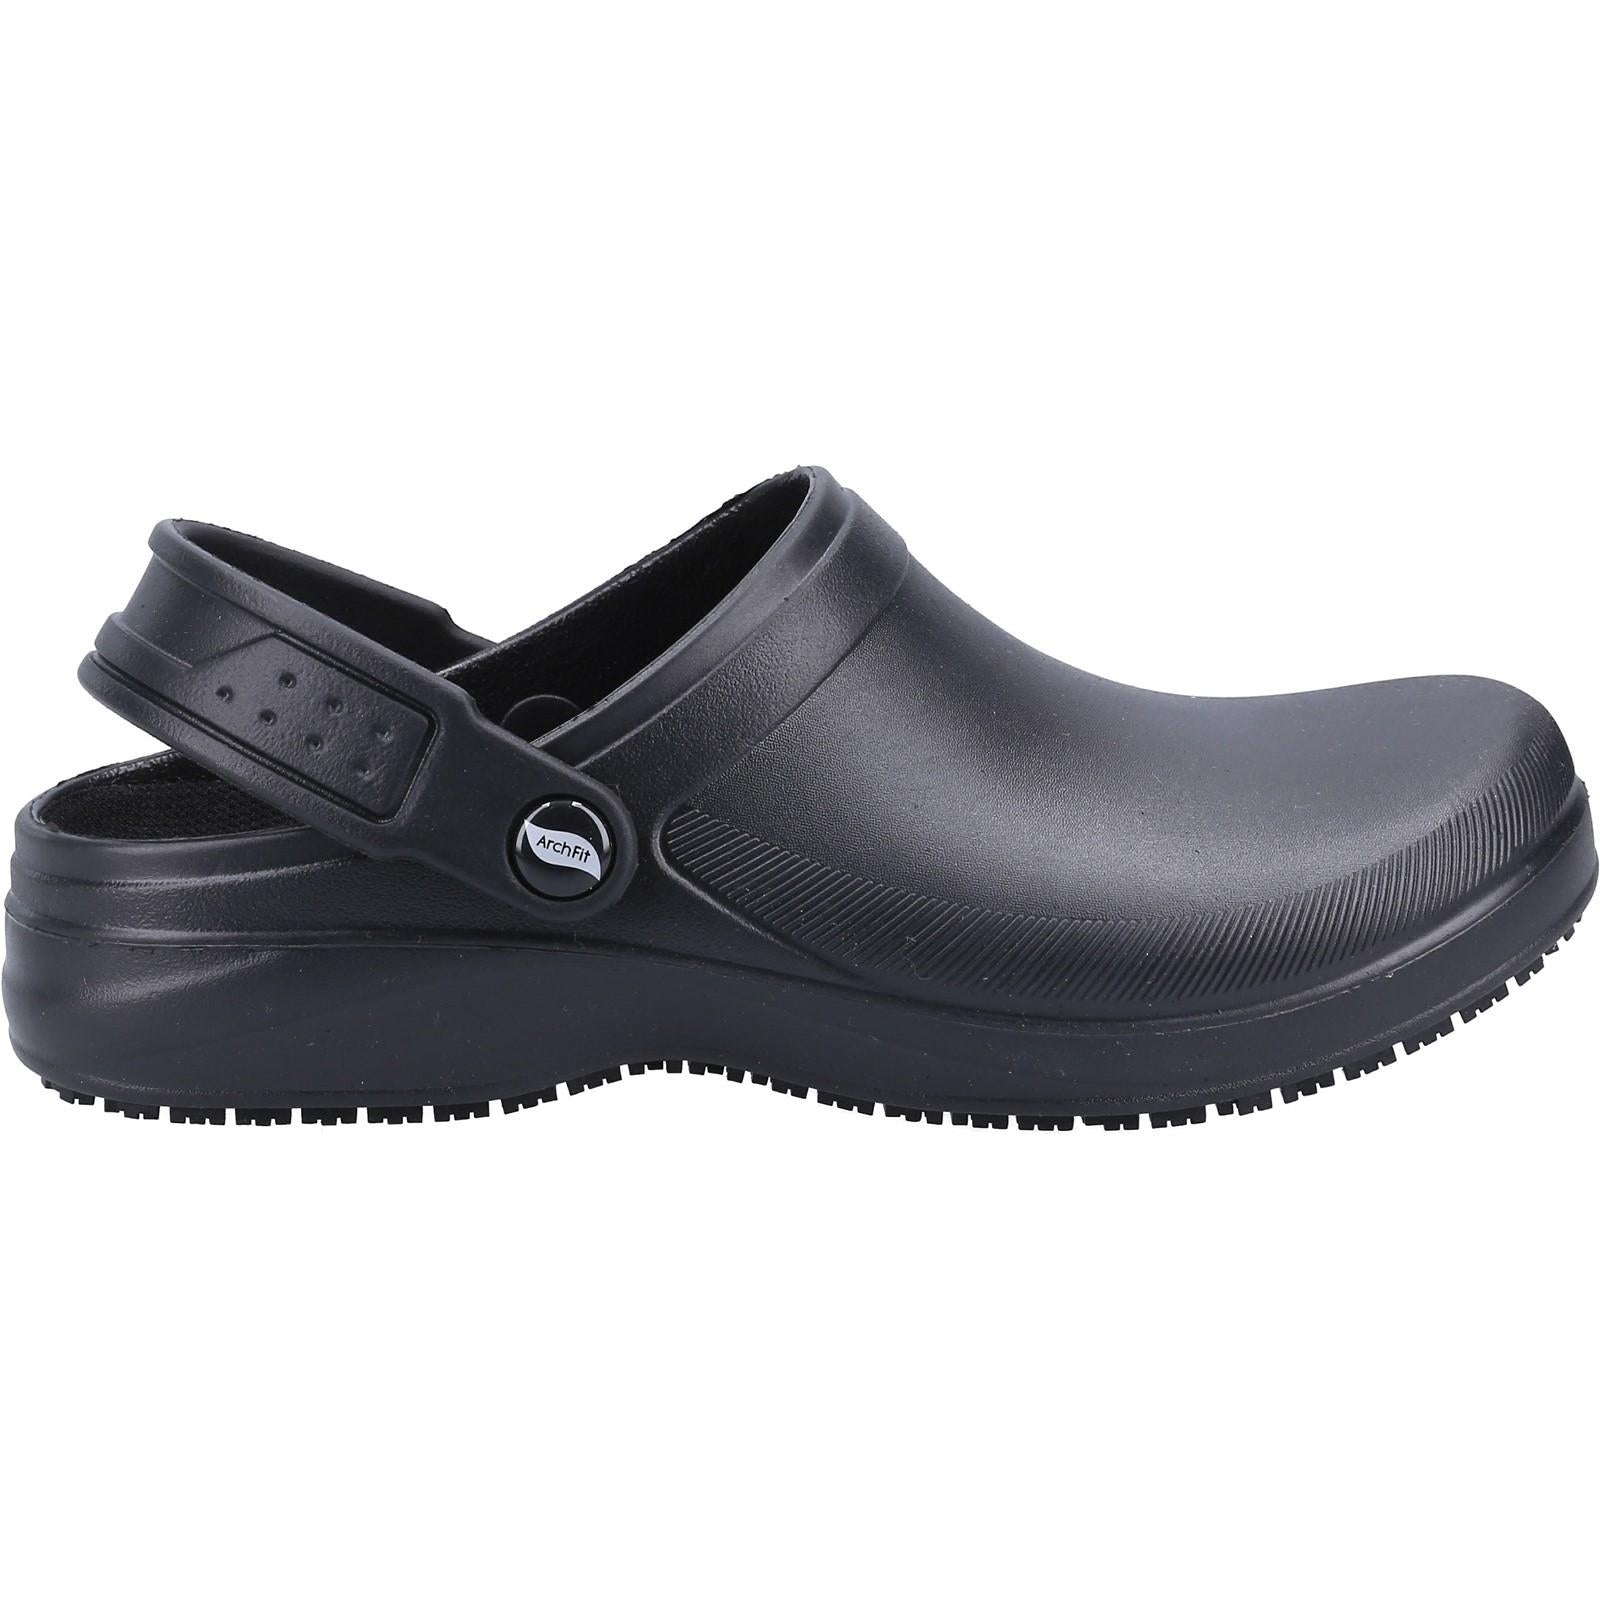 Skechers Riverbound Pasay Clog Boots